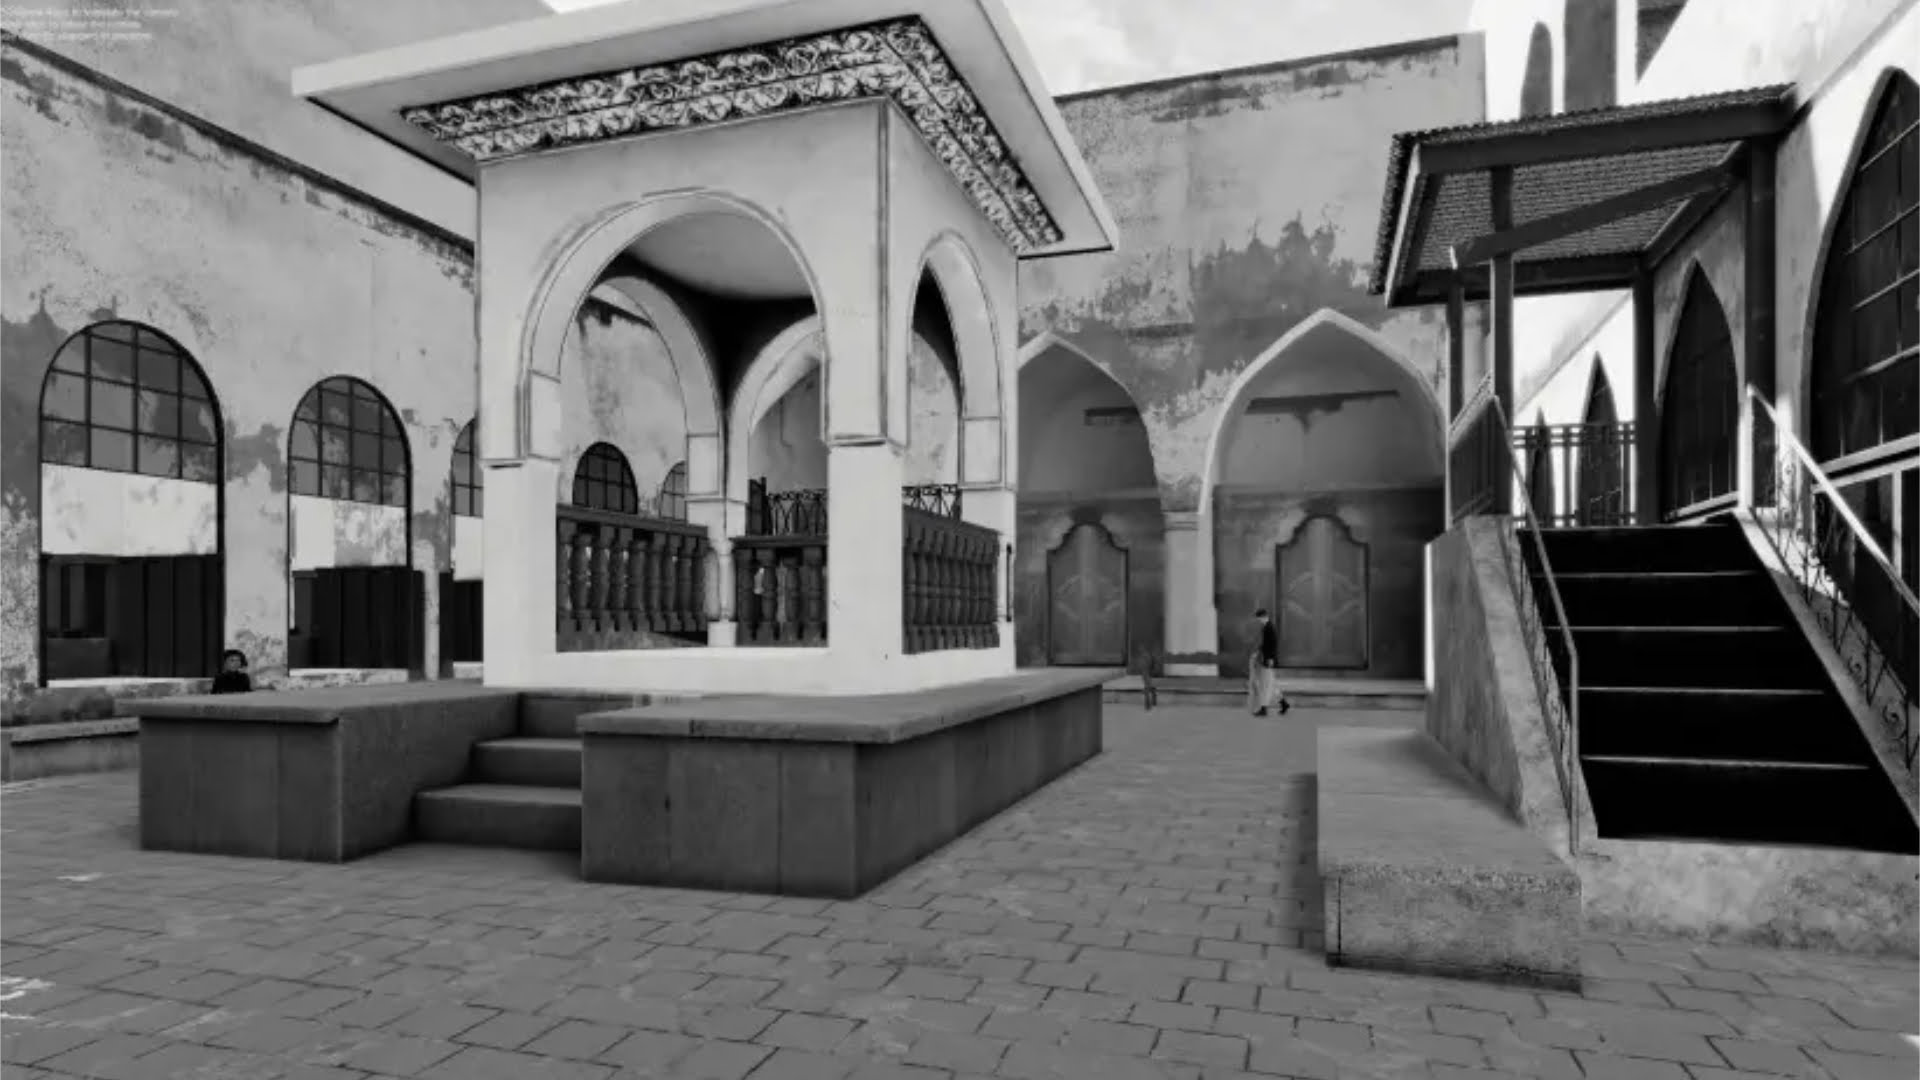 Great Synagogue of Aleppo reconstructed in Virtual Reality